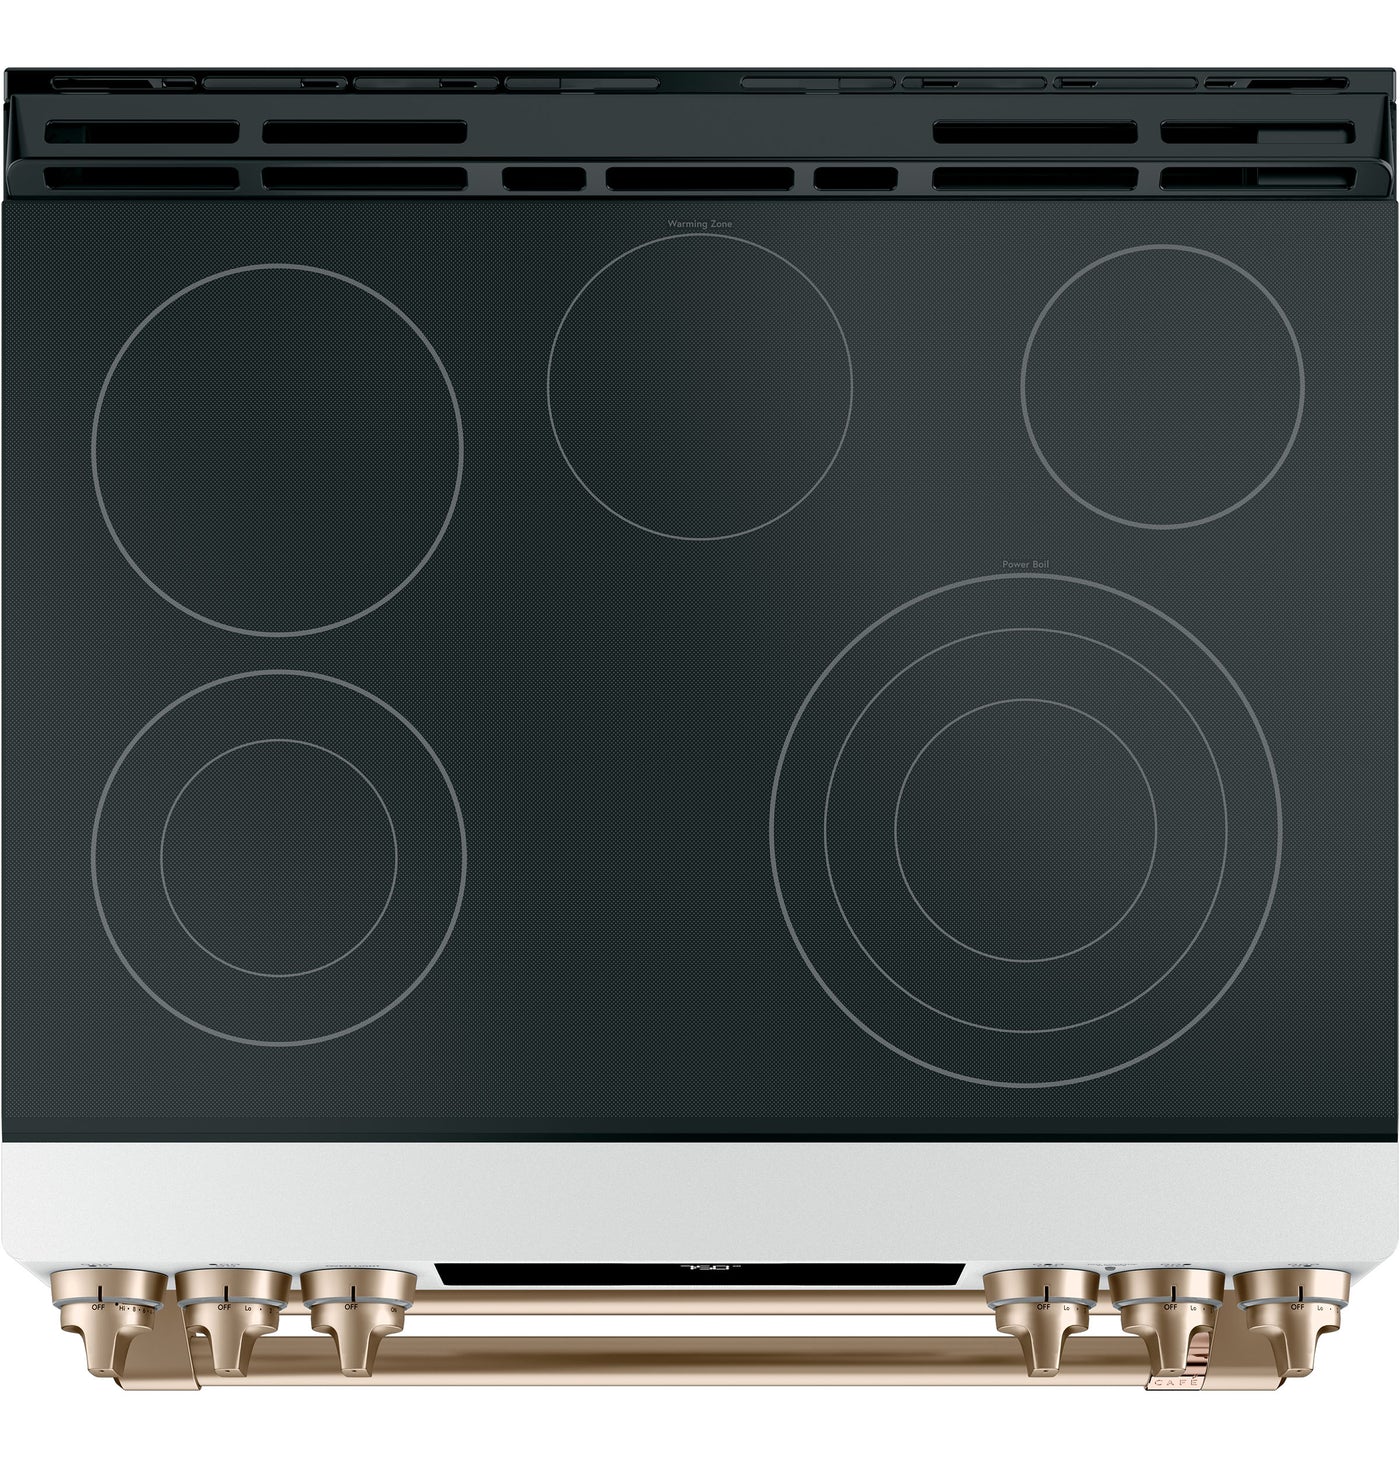 Café™ Matte White 30" Slide-In Front Control Radiant and Convection Double Oven Range with Air Fry (6.7 Cu.Ft) - CCES750P4MW2